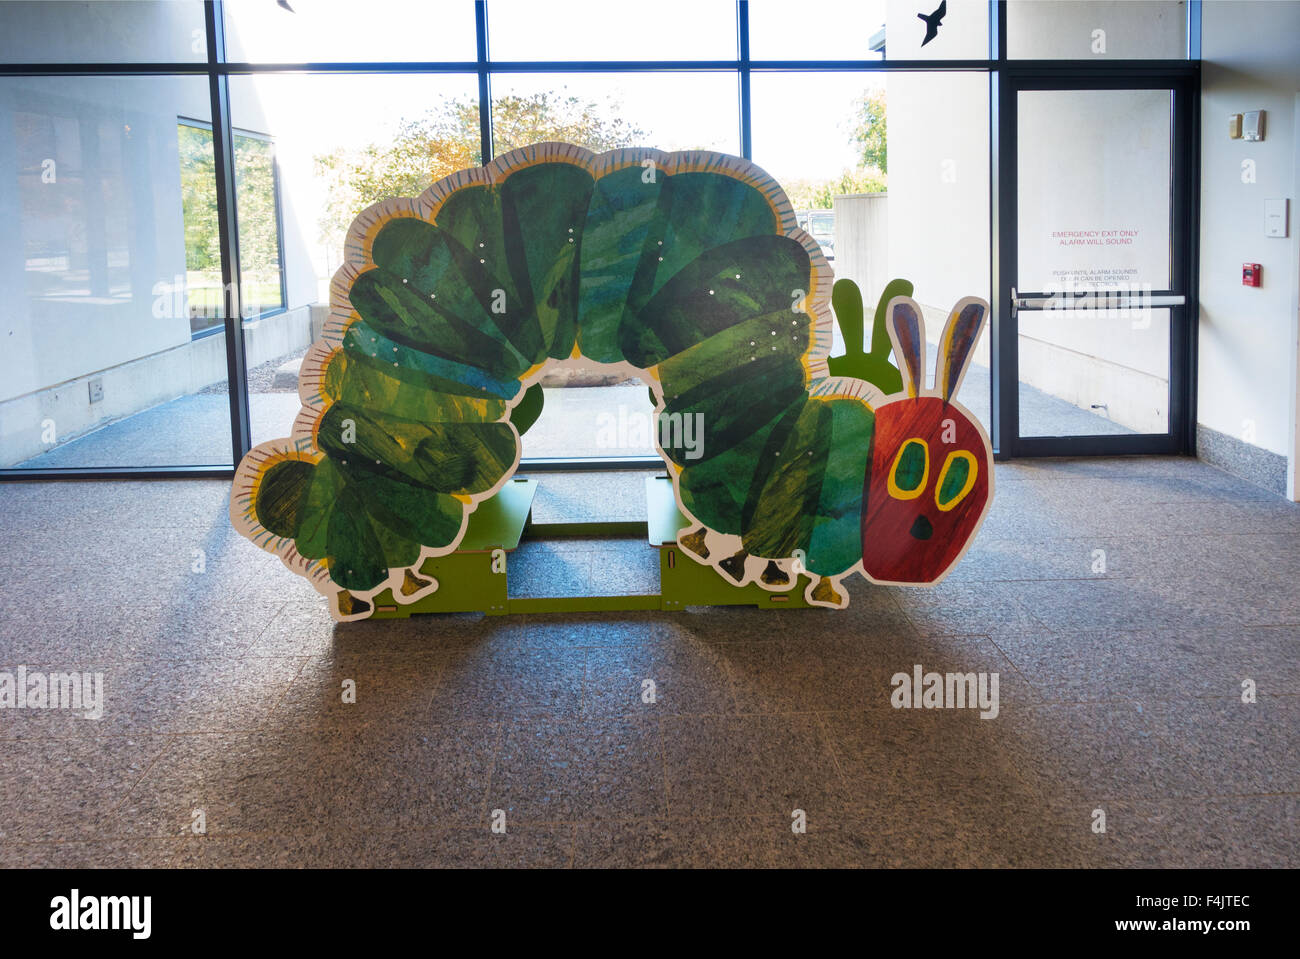 Eric Carle museum of picture book art in Amherst MA Stock Photo